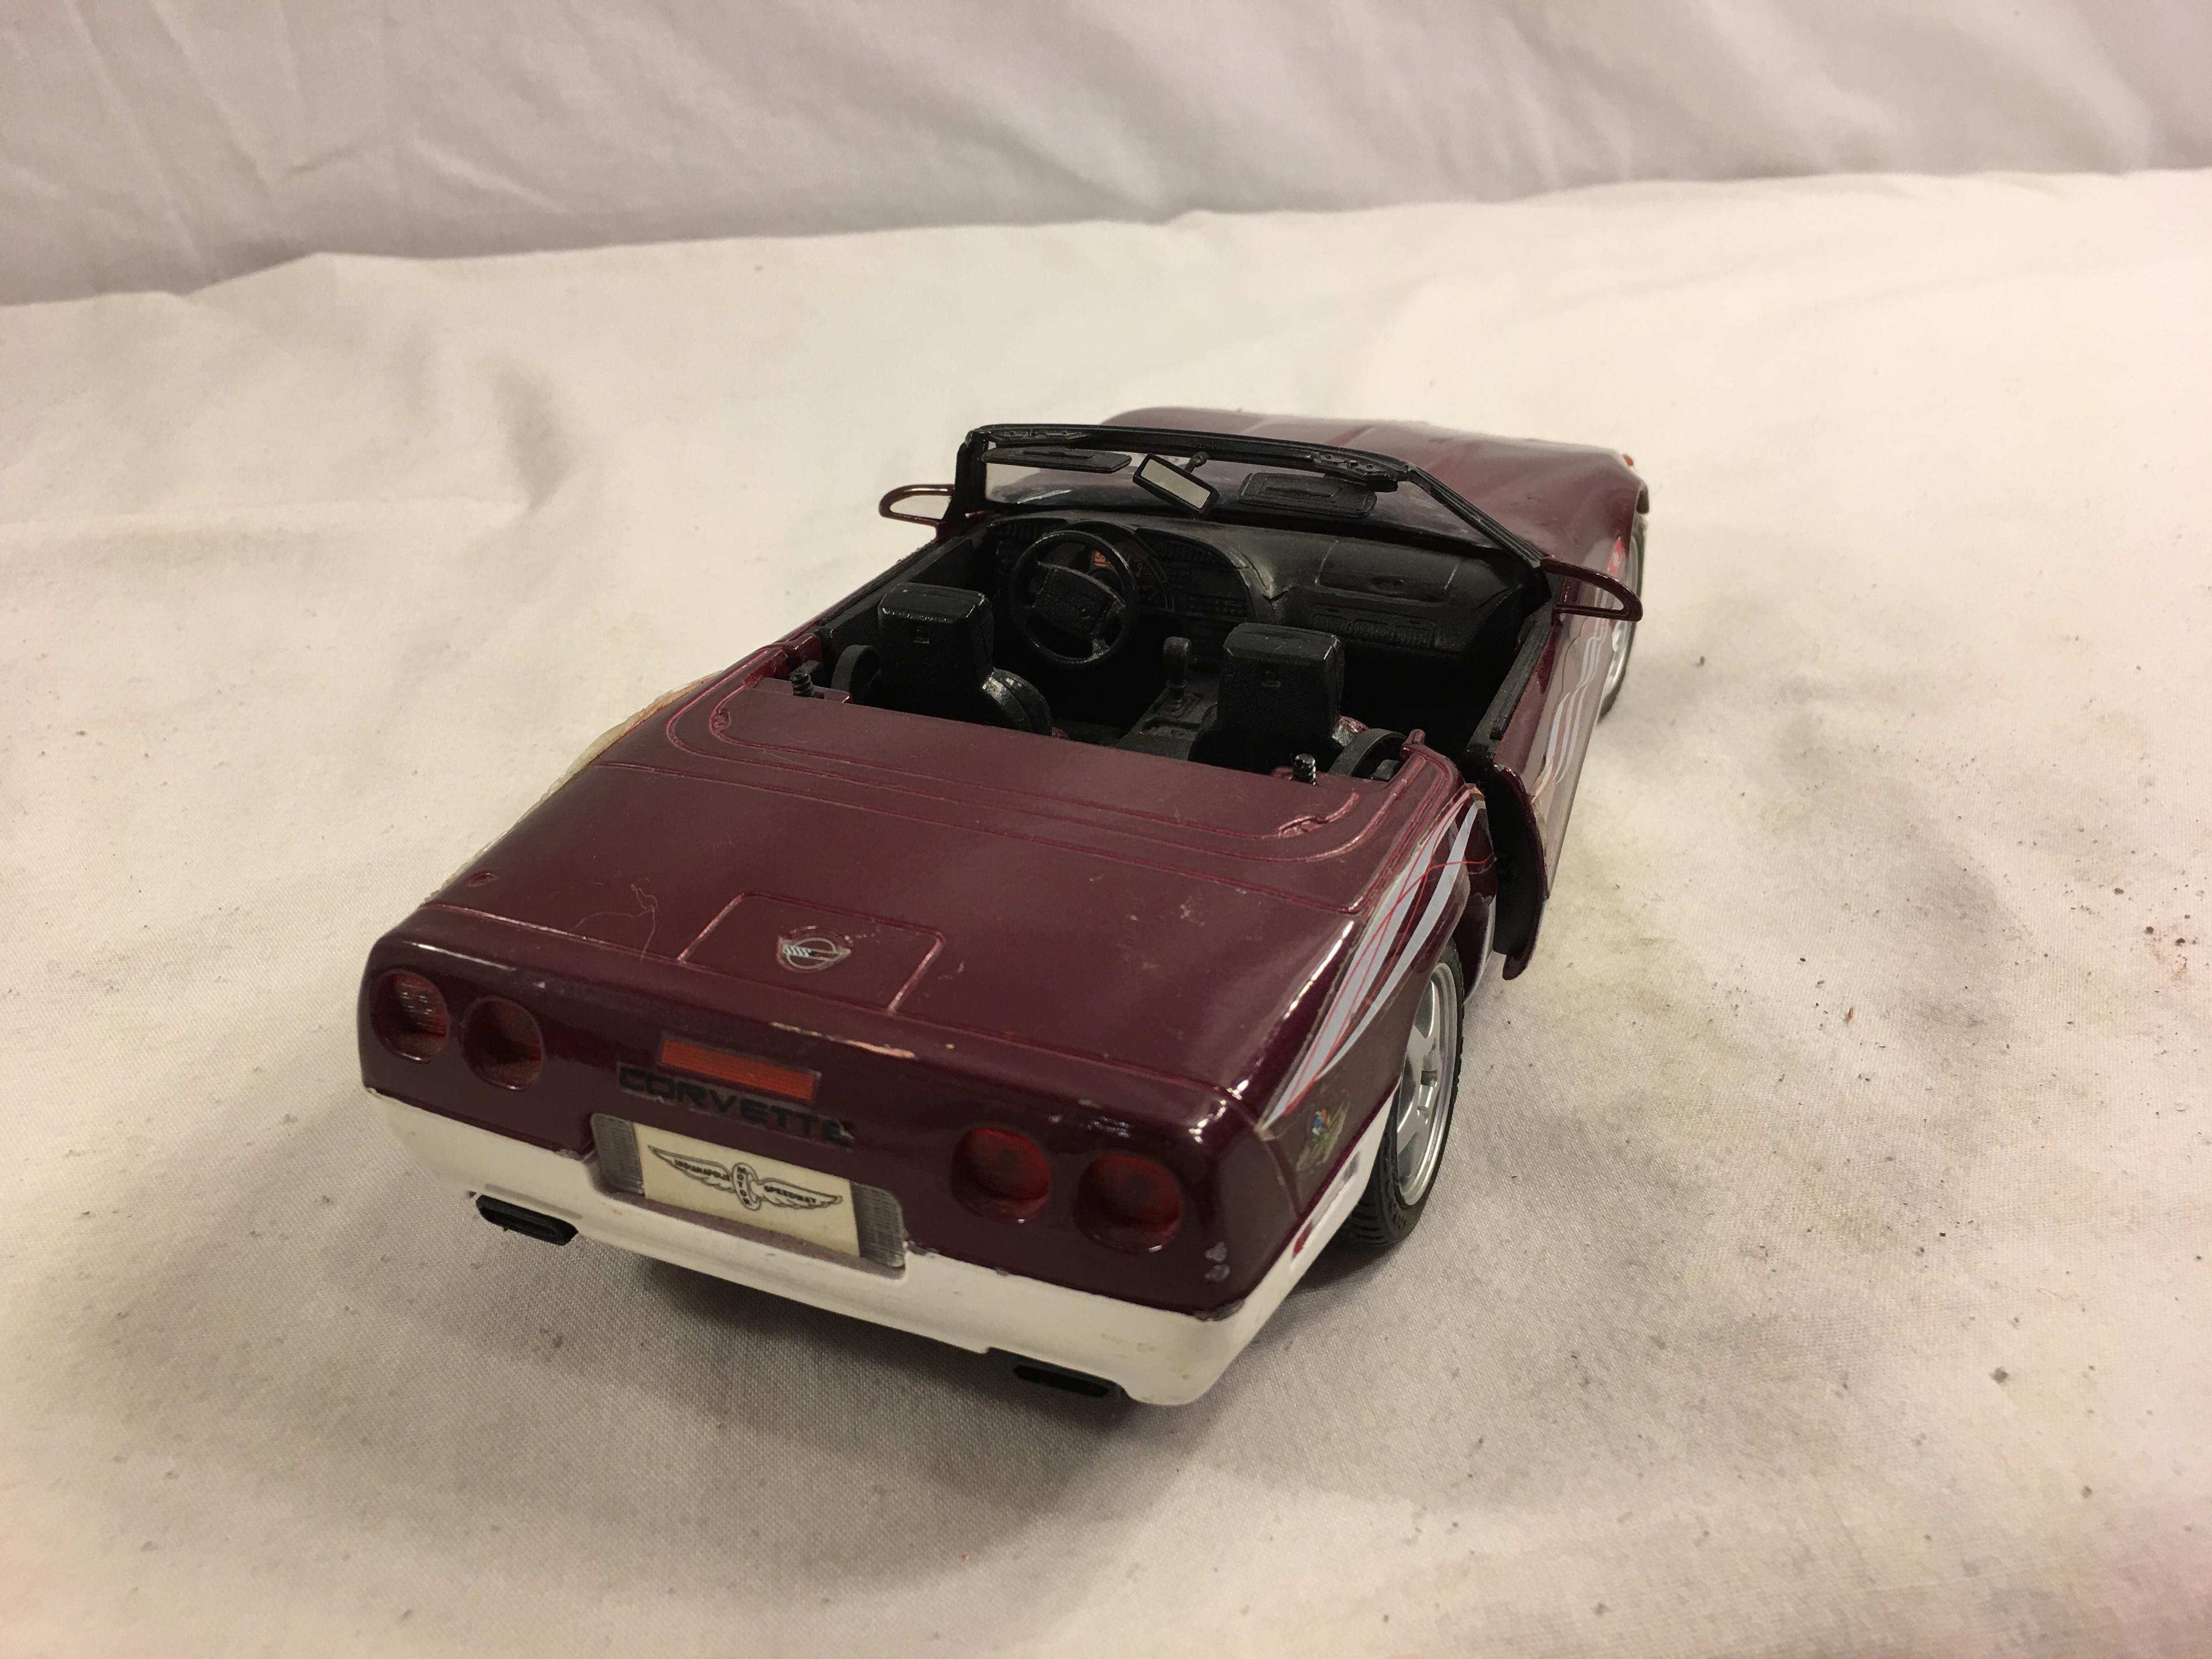 Collector Loose Maisto Corvette Scale 1/18 DieCast Metal 79th Indiannapolis 500 May 28th 1995